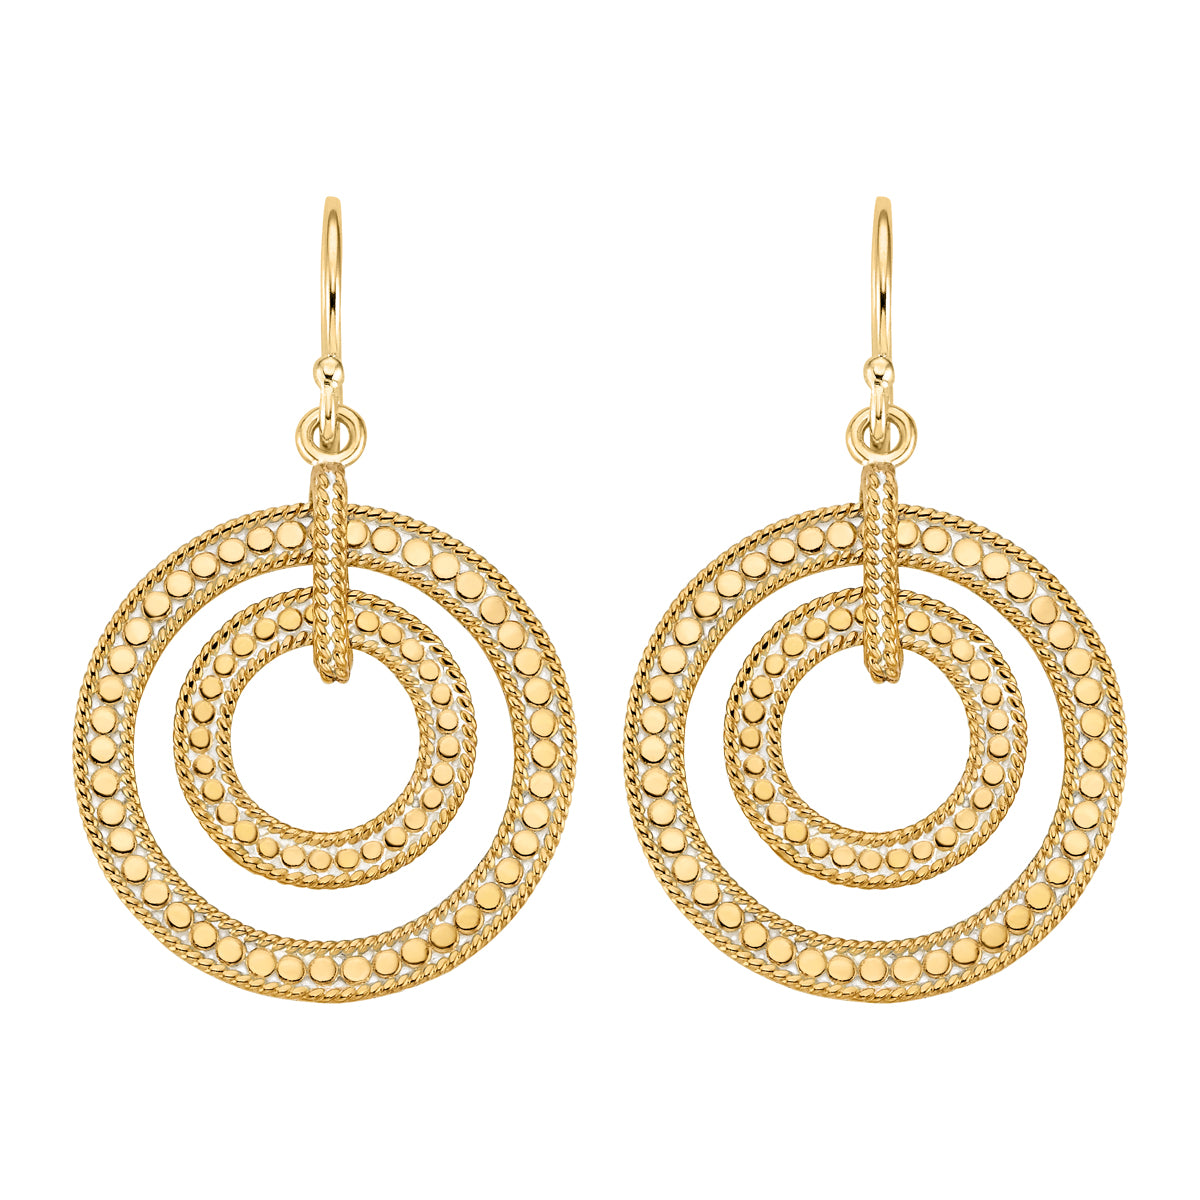 Ana Beck 18k gold plated and sterling silver Double Open Circle Earrings - Gold